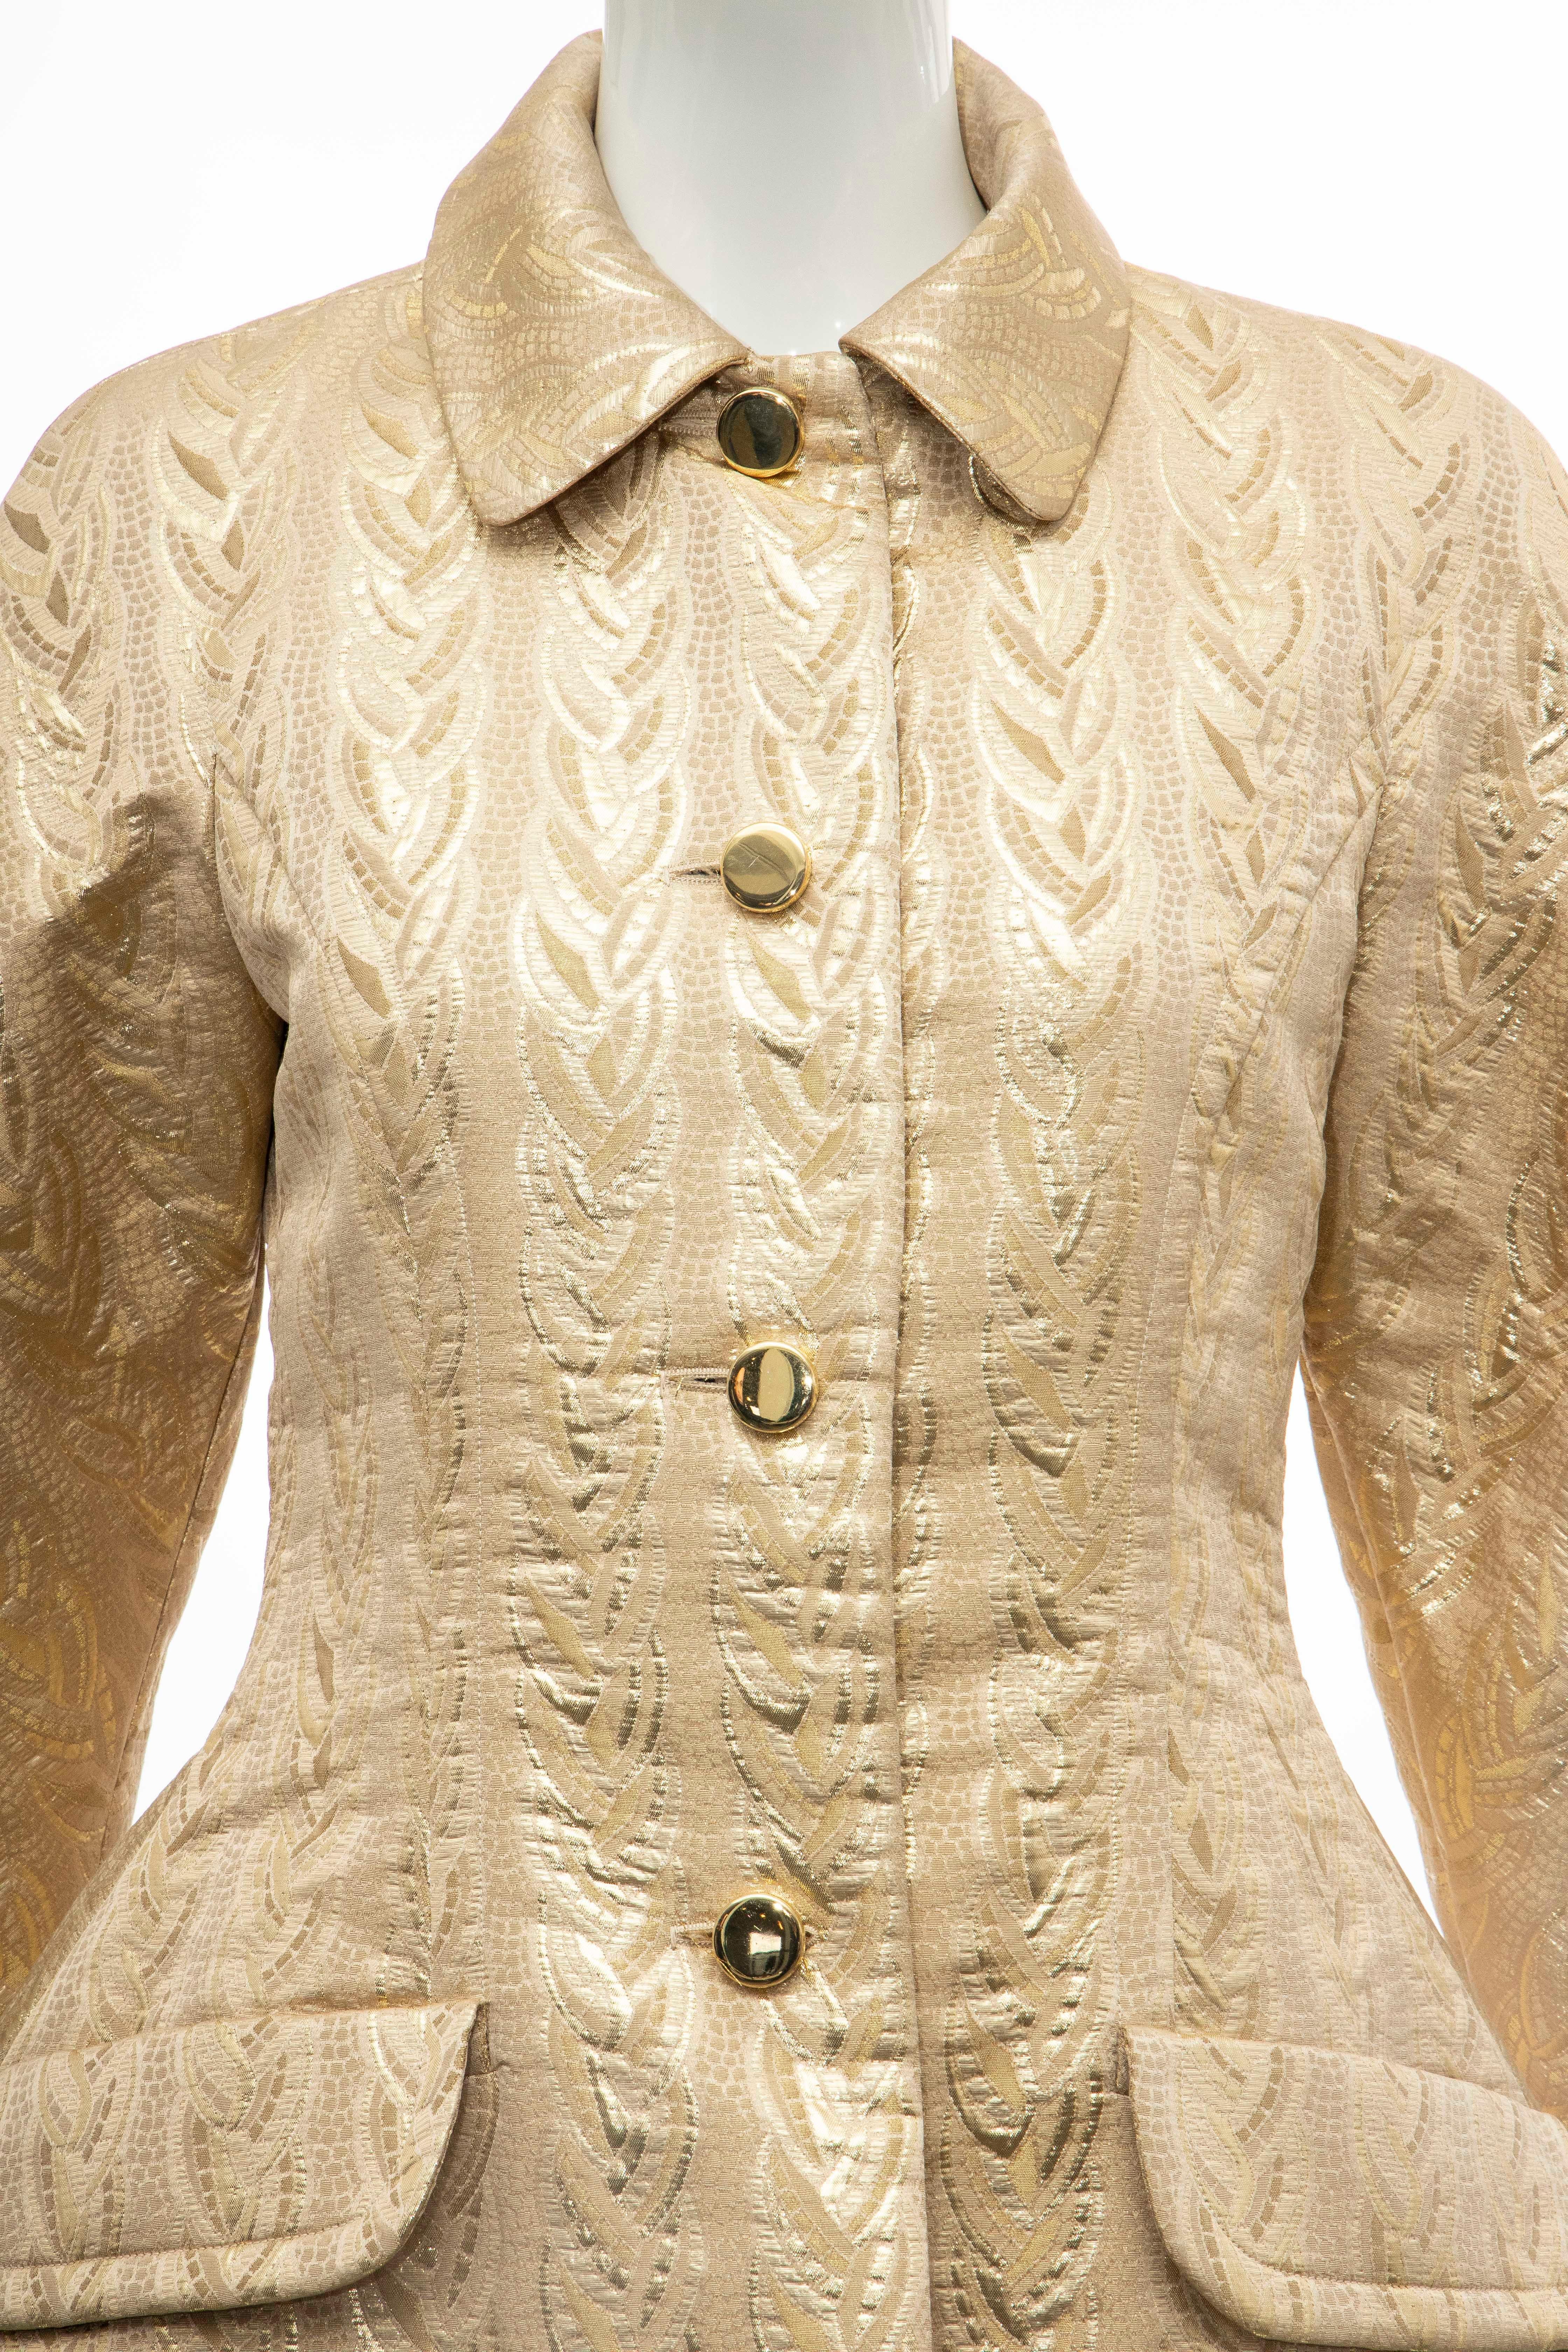 Prada, Fall 1992 runway gold brocade jacket, dual flap pockets at waist, button closures at center front and fully lined.


Bust: 33, Waist: 29.5, Shoulder: 16, Length: 26.5, Sleeve: 27.5

Fabric: 60% Acetate, 40% Cupro